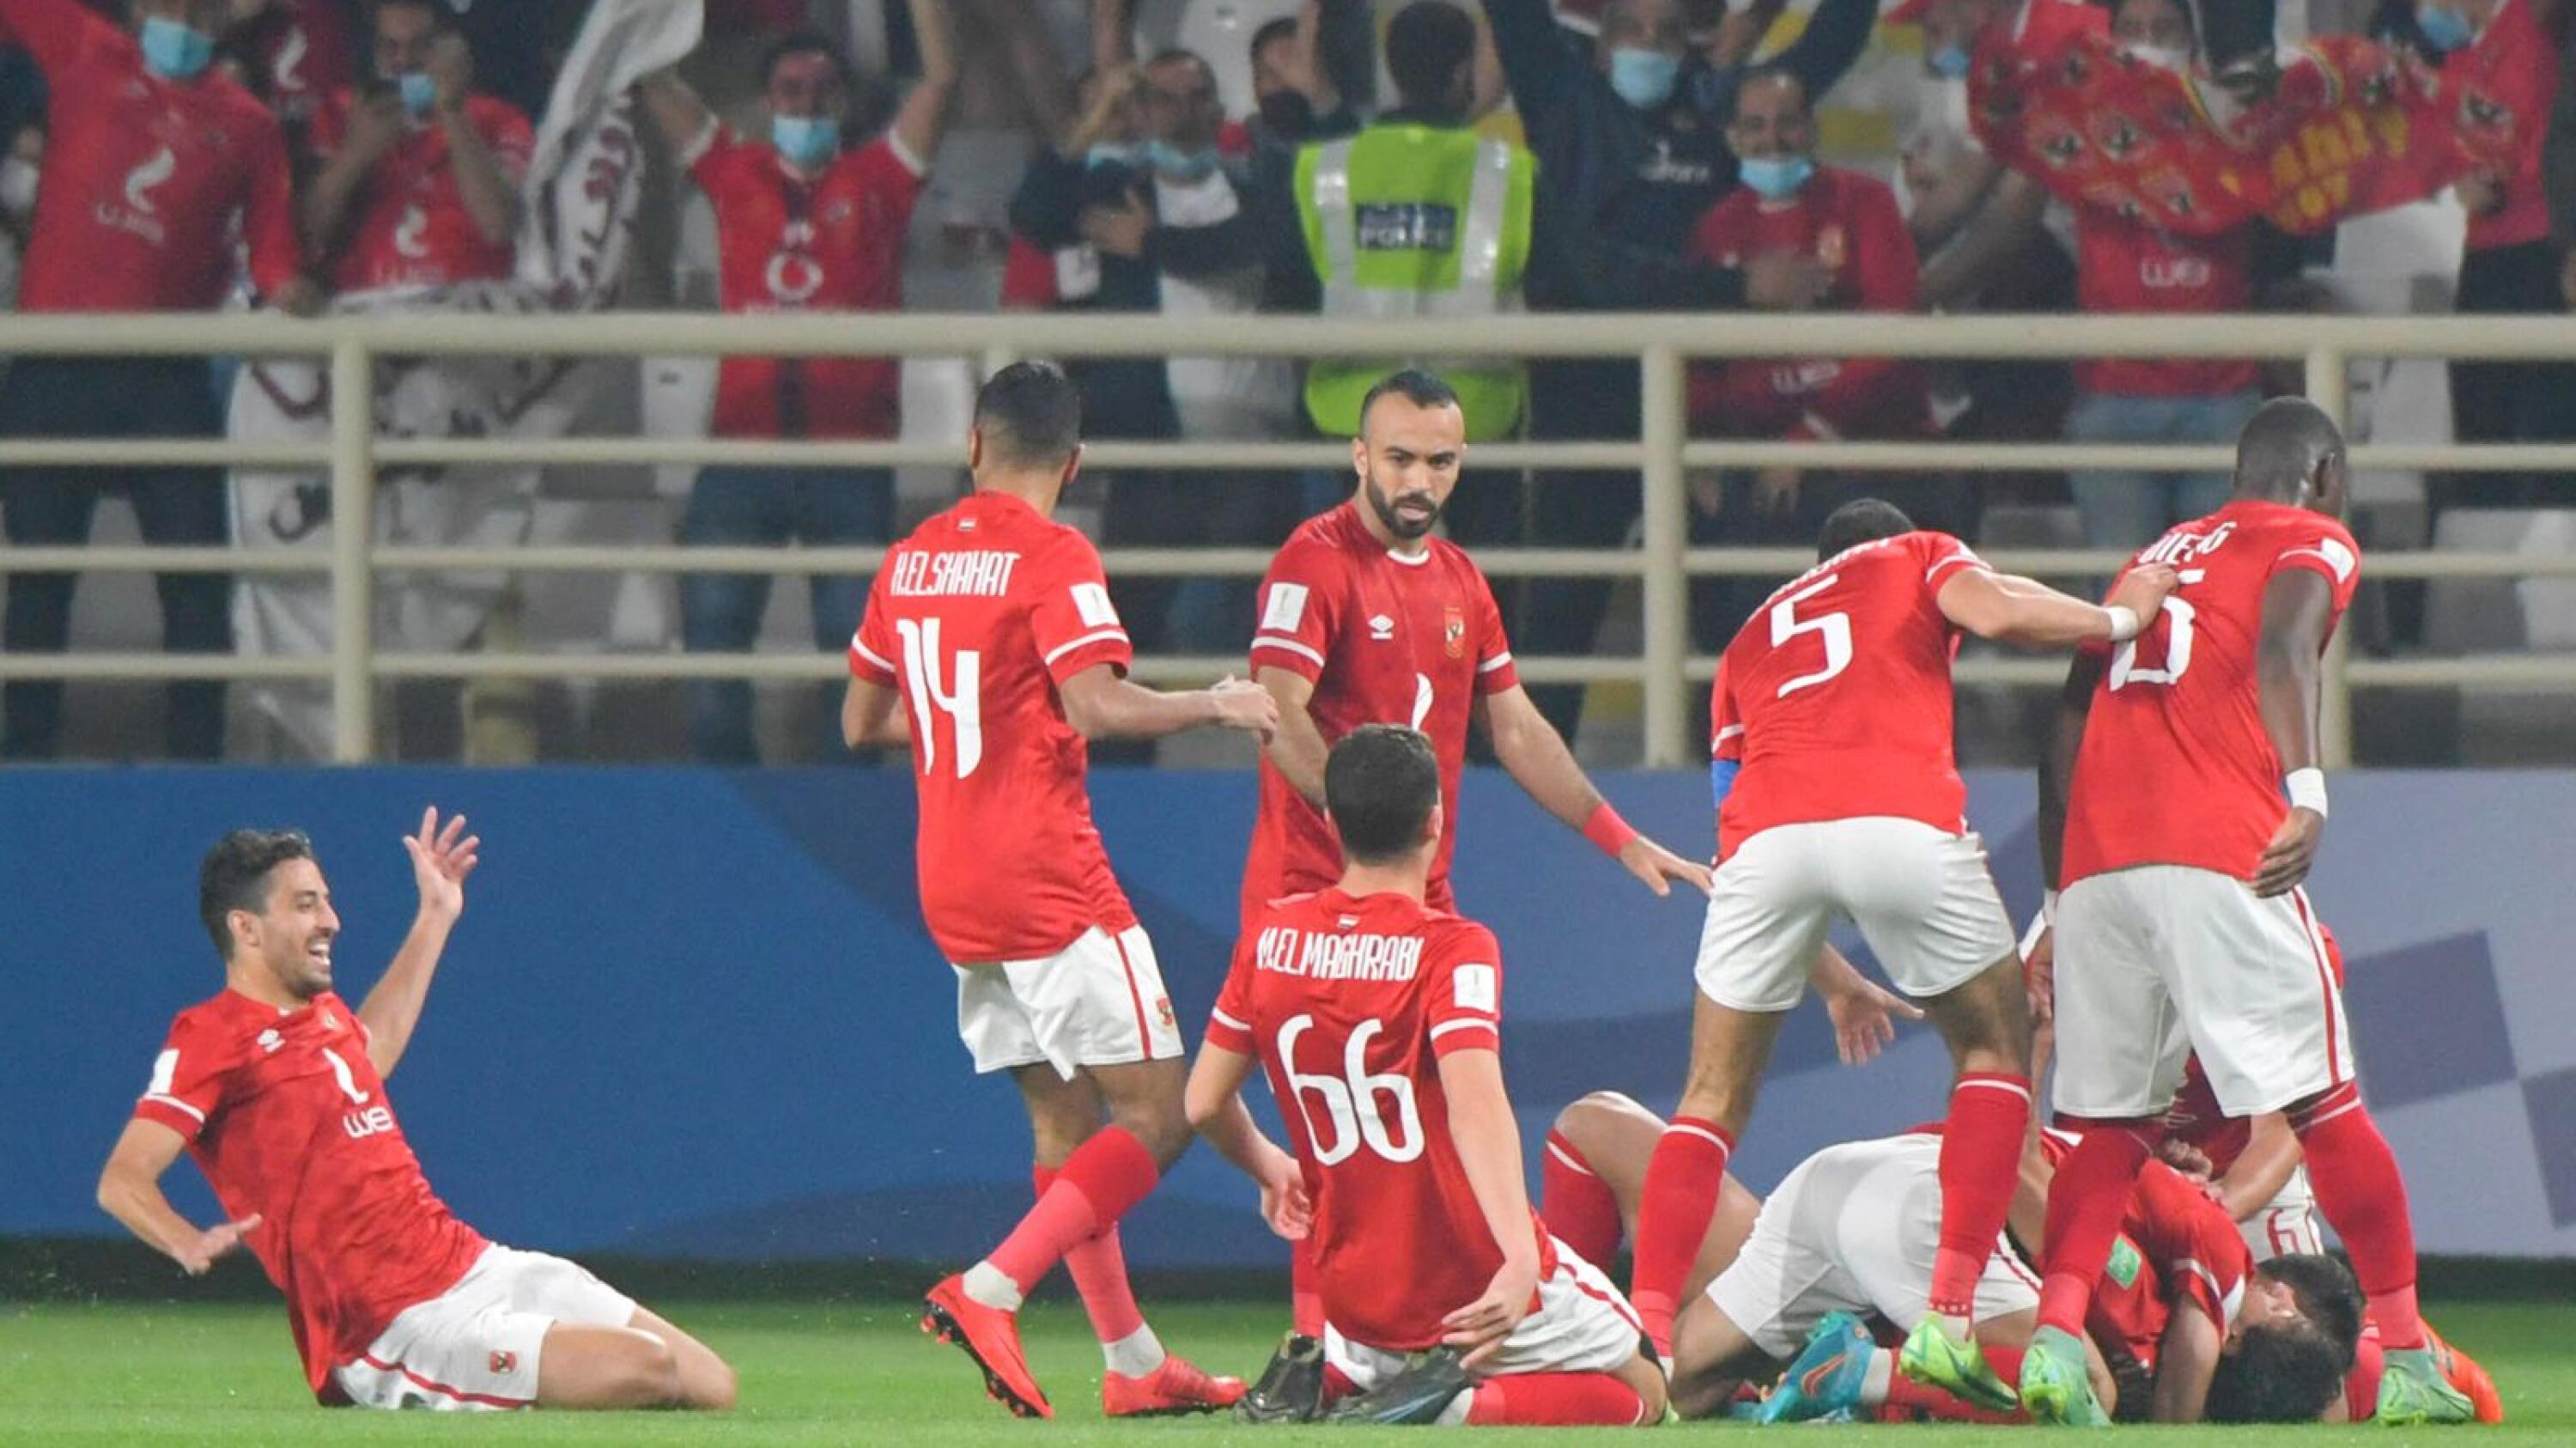 Al-Ahly players celebrate with defender Mohamed Hany after he scored the only goal during their FIFA Club World Cup football match against Mexico's Monterrey at al-Nahyan Stadium in Abu Dhabi on Saturday